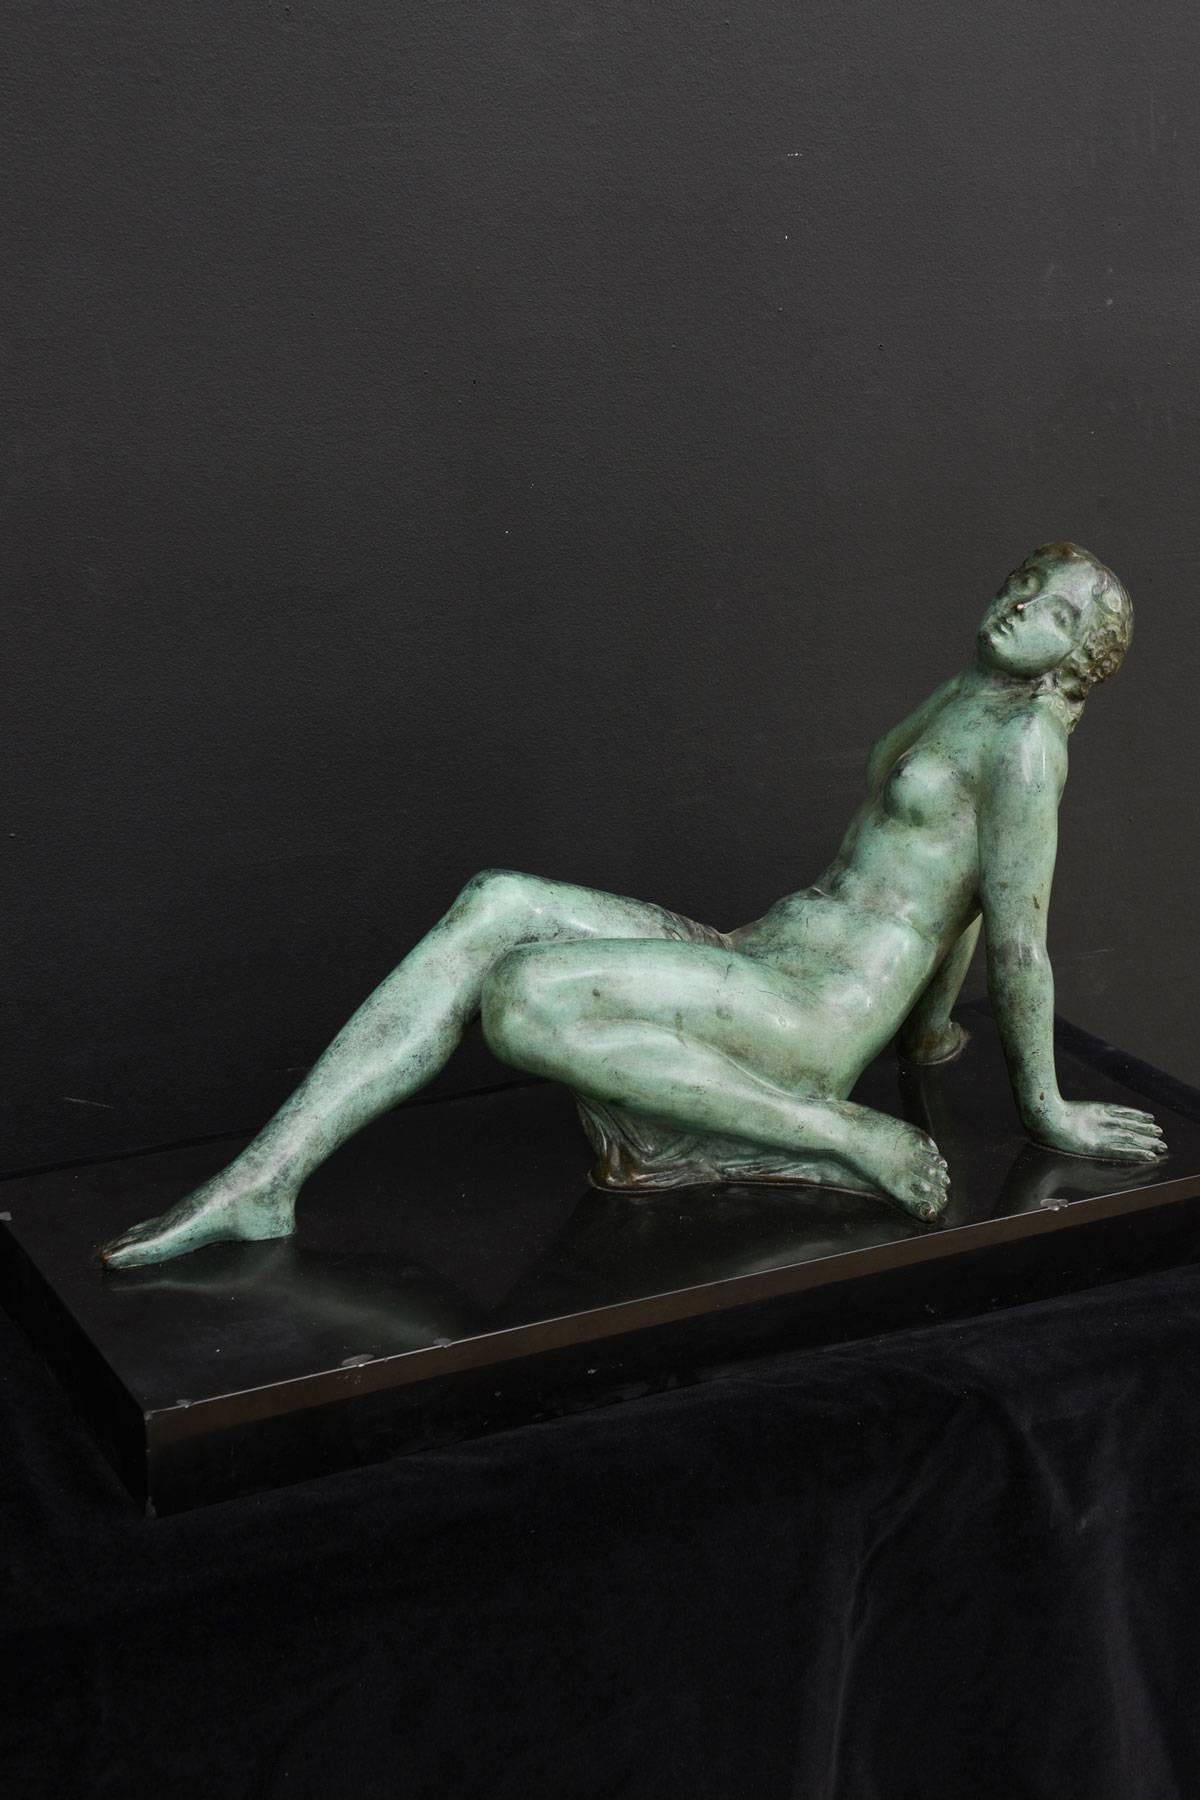 Jaume Martrus I Riera "Reclining Female Nude" bronze sculpture

(Minor chips in black marble base). Martrus trained in the School of Arts and Crafts at Manresa, Spain. Was a member of the Artistic Circle of St. Luke, a prestigious cultural